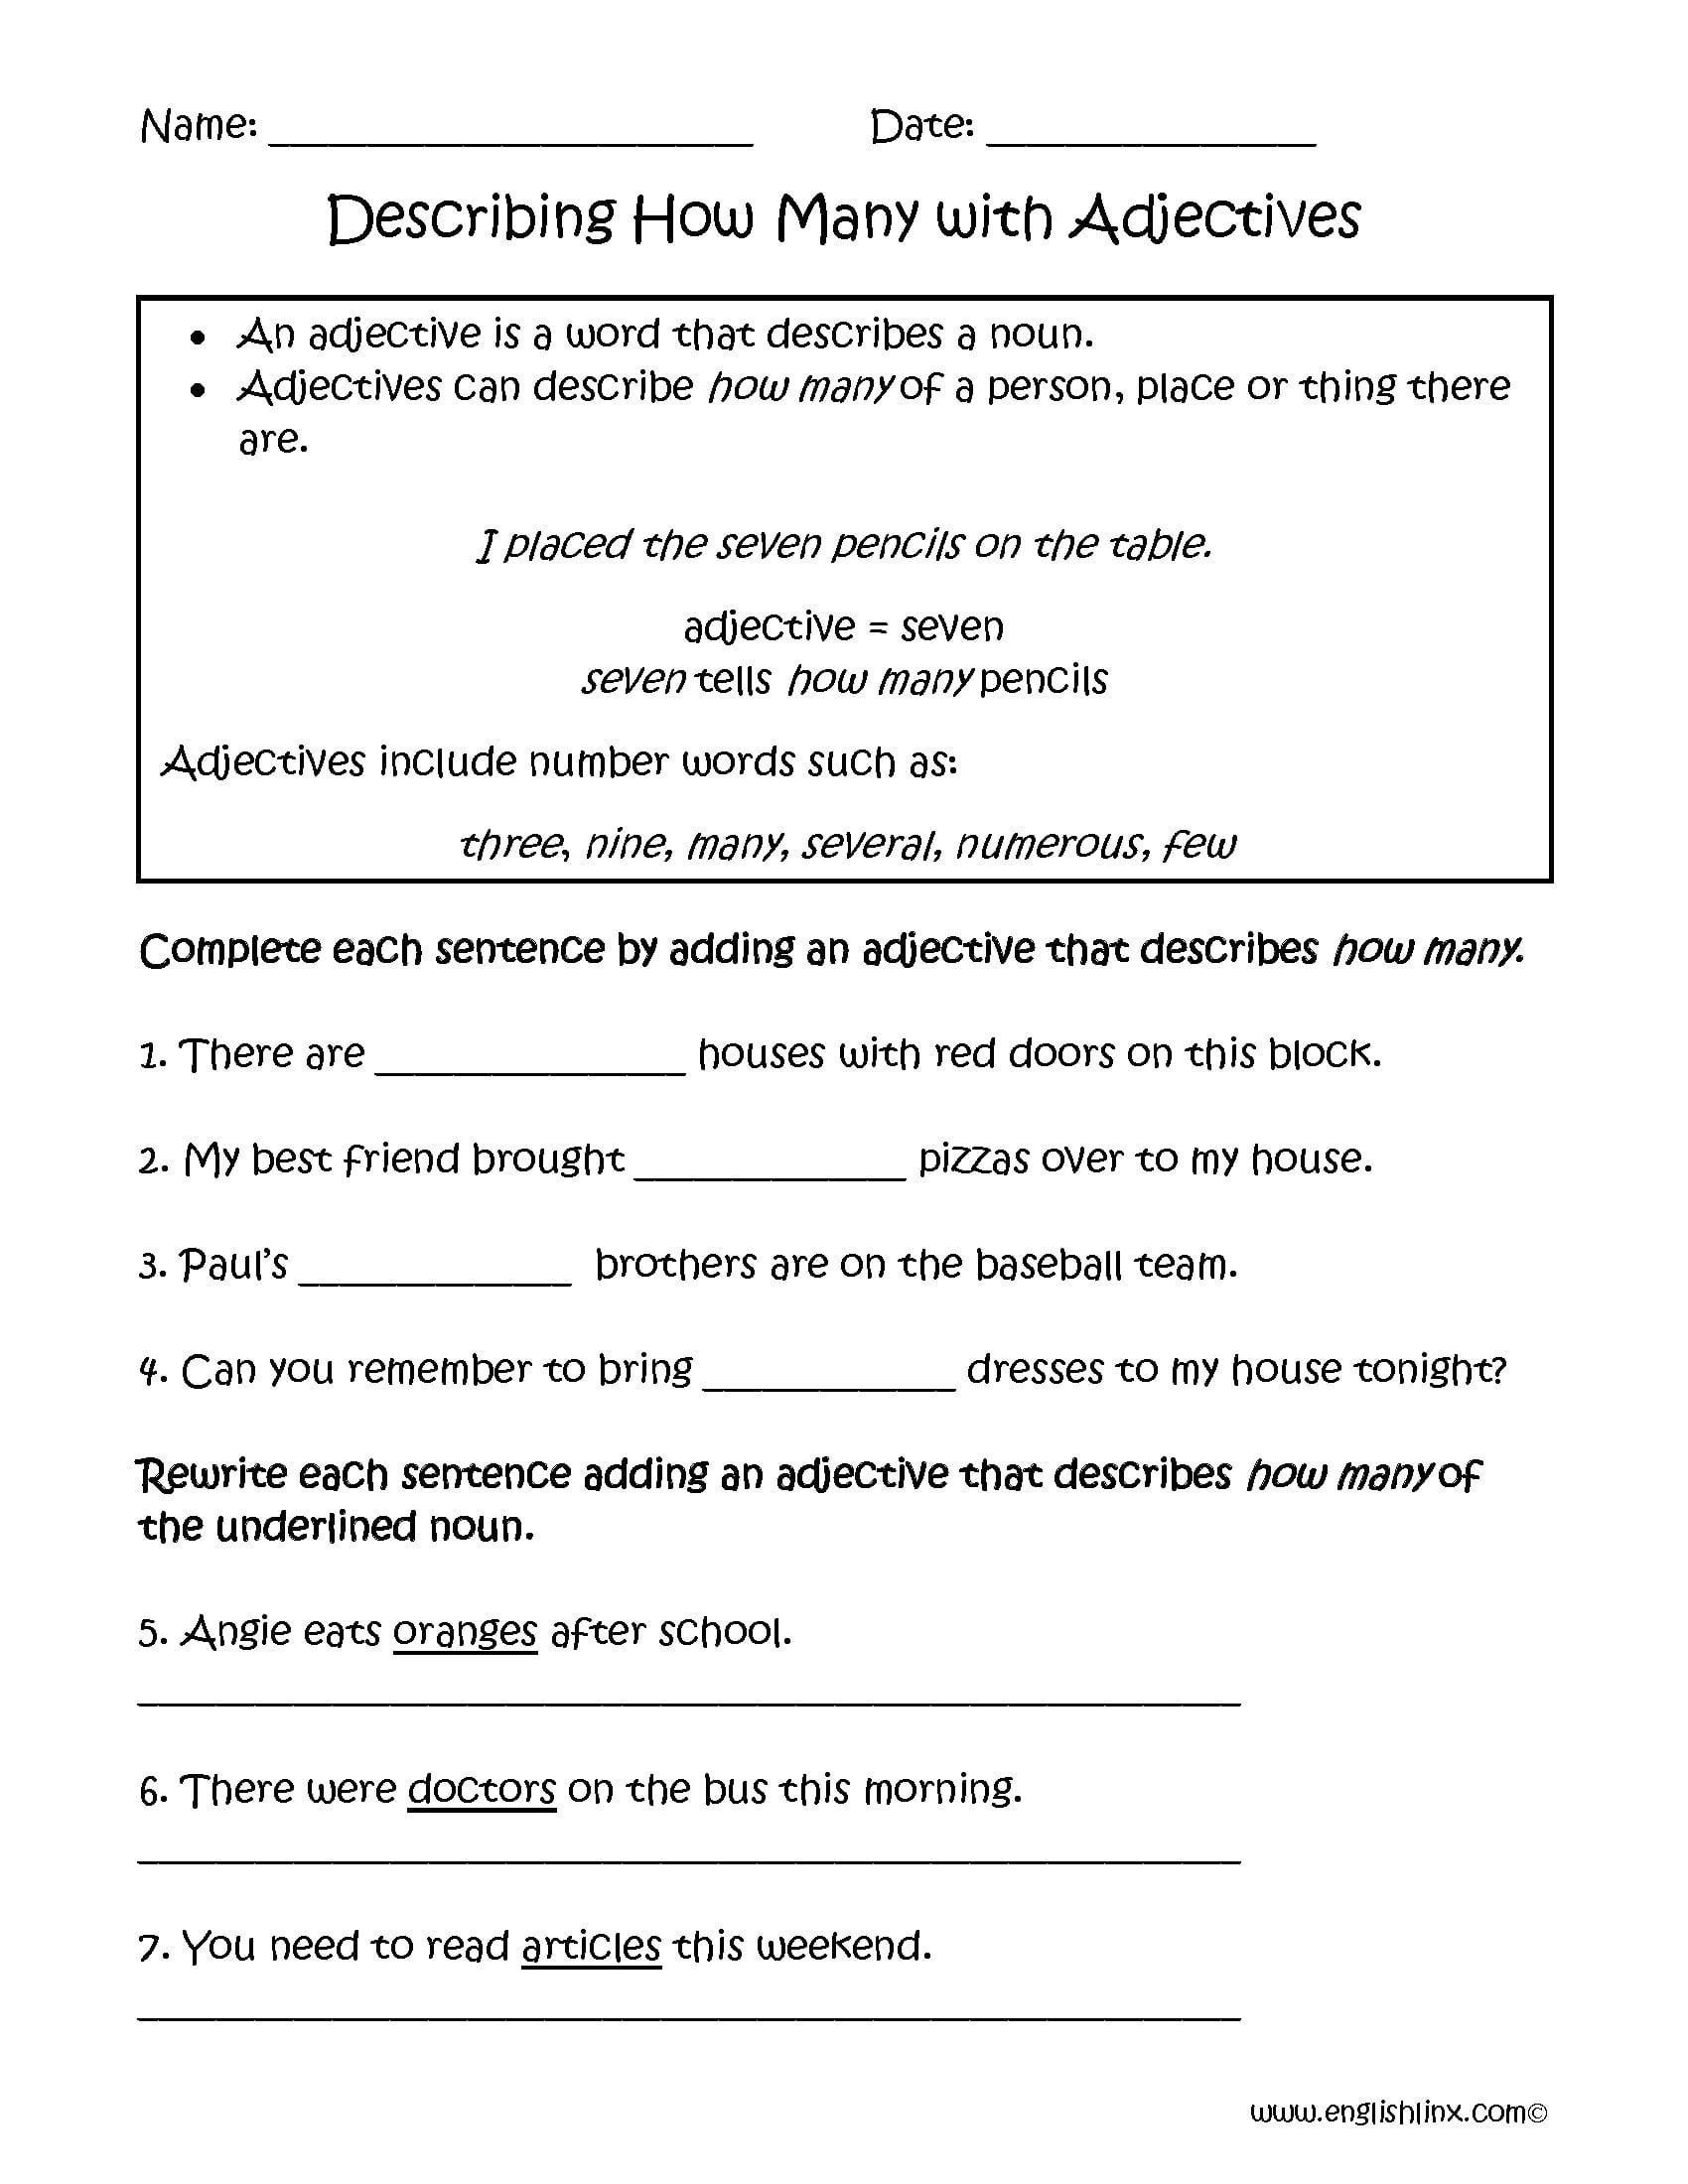 Adjectives Worksheets To Print